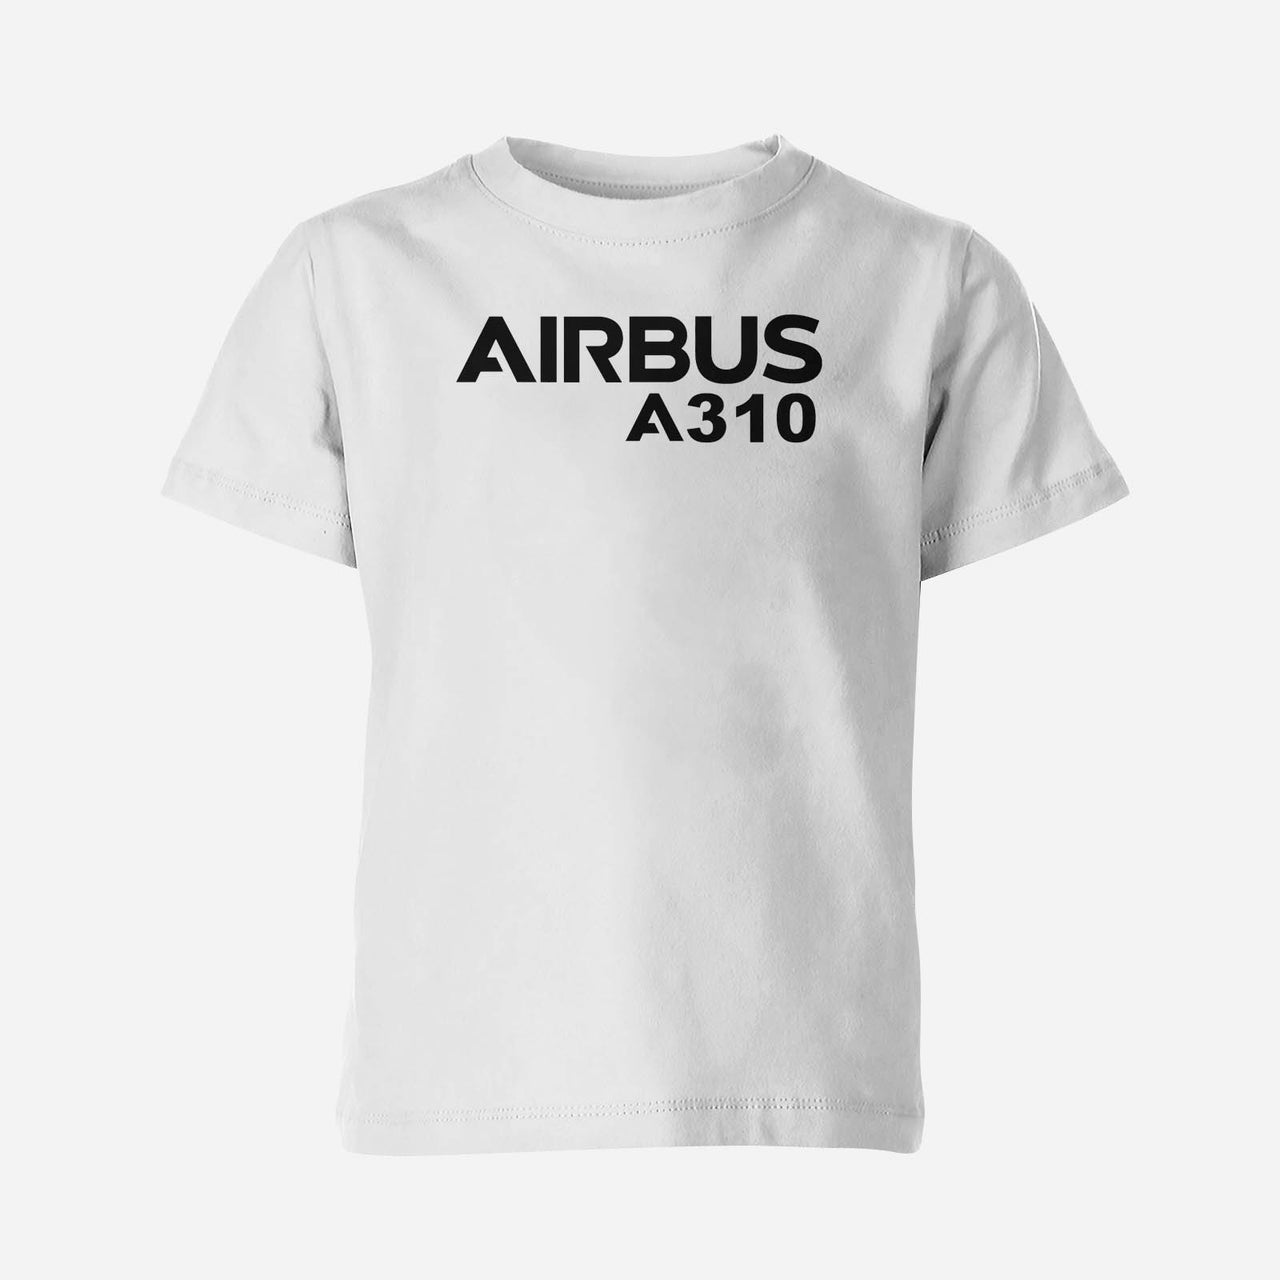 Airbus A310 & Text Designed Children T-Shirts